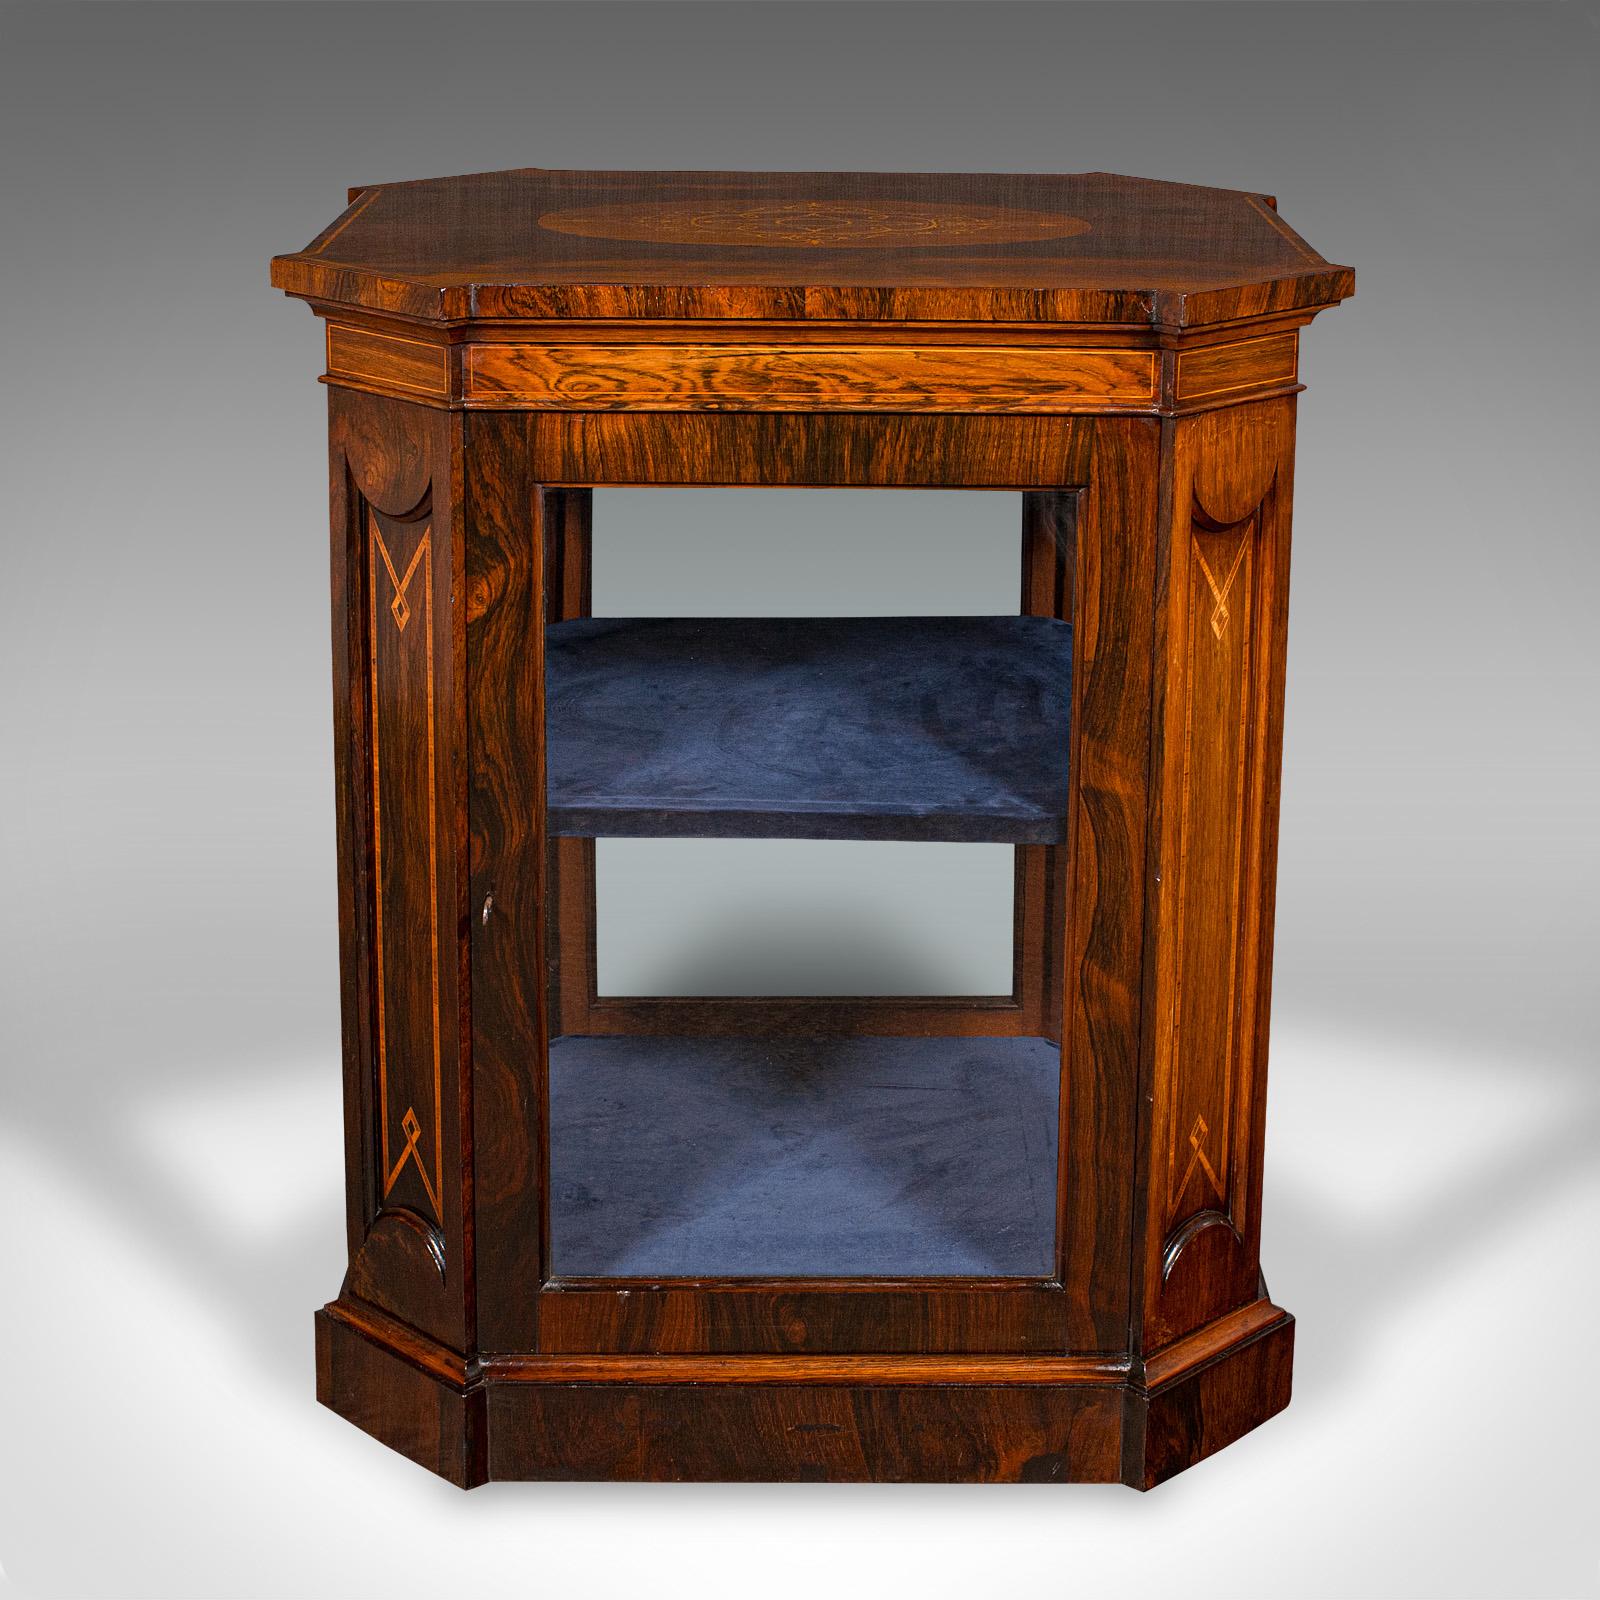 
This is an antique jeweller's display cabinet. An English, rosewood and glass shop retail case, dating to the Regency period, circa 1820.

Superb cabinetry in a fascinating form with fully glazed sides
Displays a desirable aged patina and in very